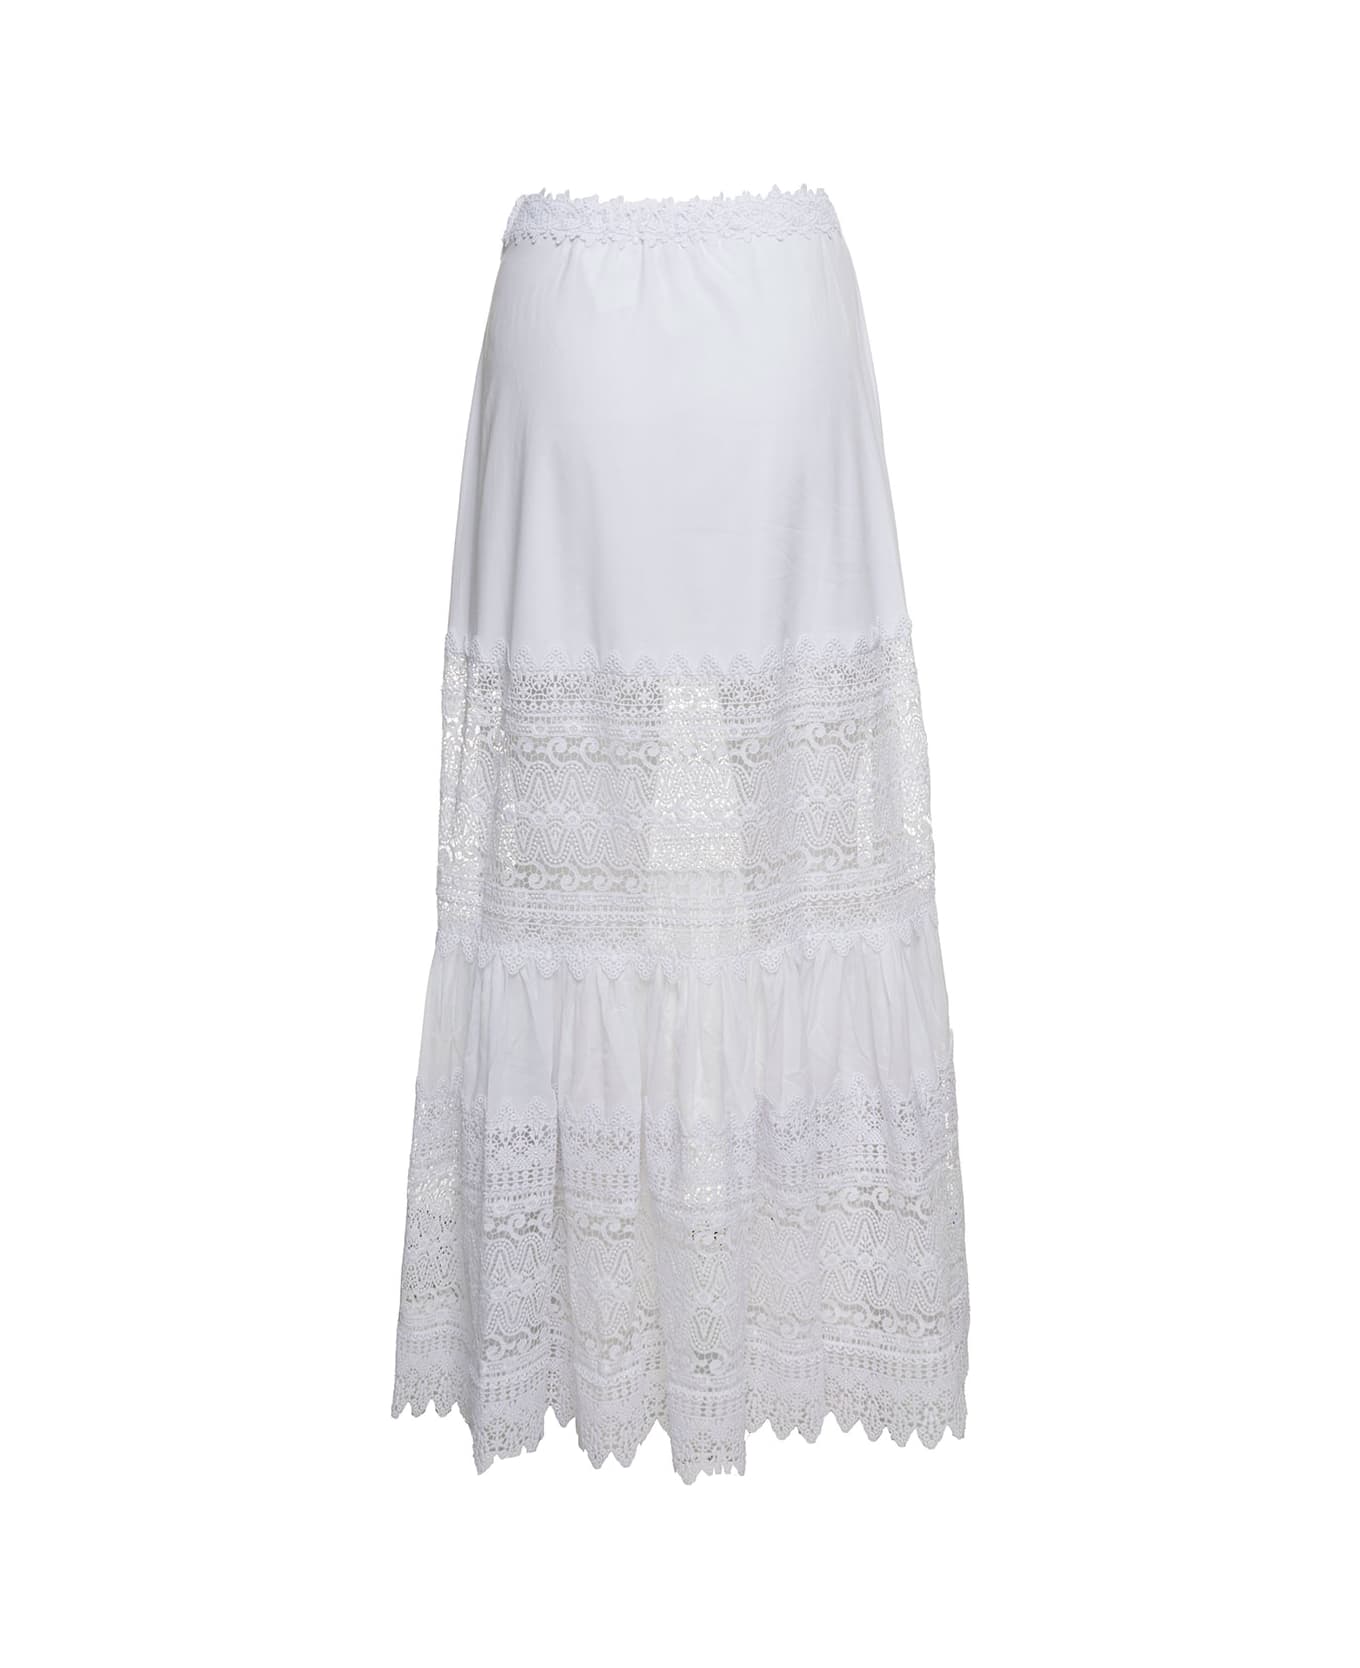 Charo Ruiz 'viola' White Flounced Skirt With Lace Inserts In Cotton Blend Woman - White スカート